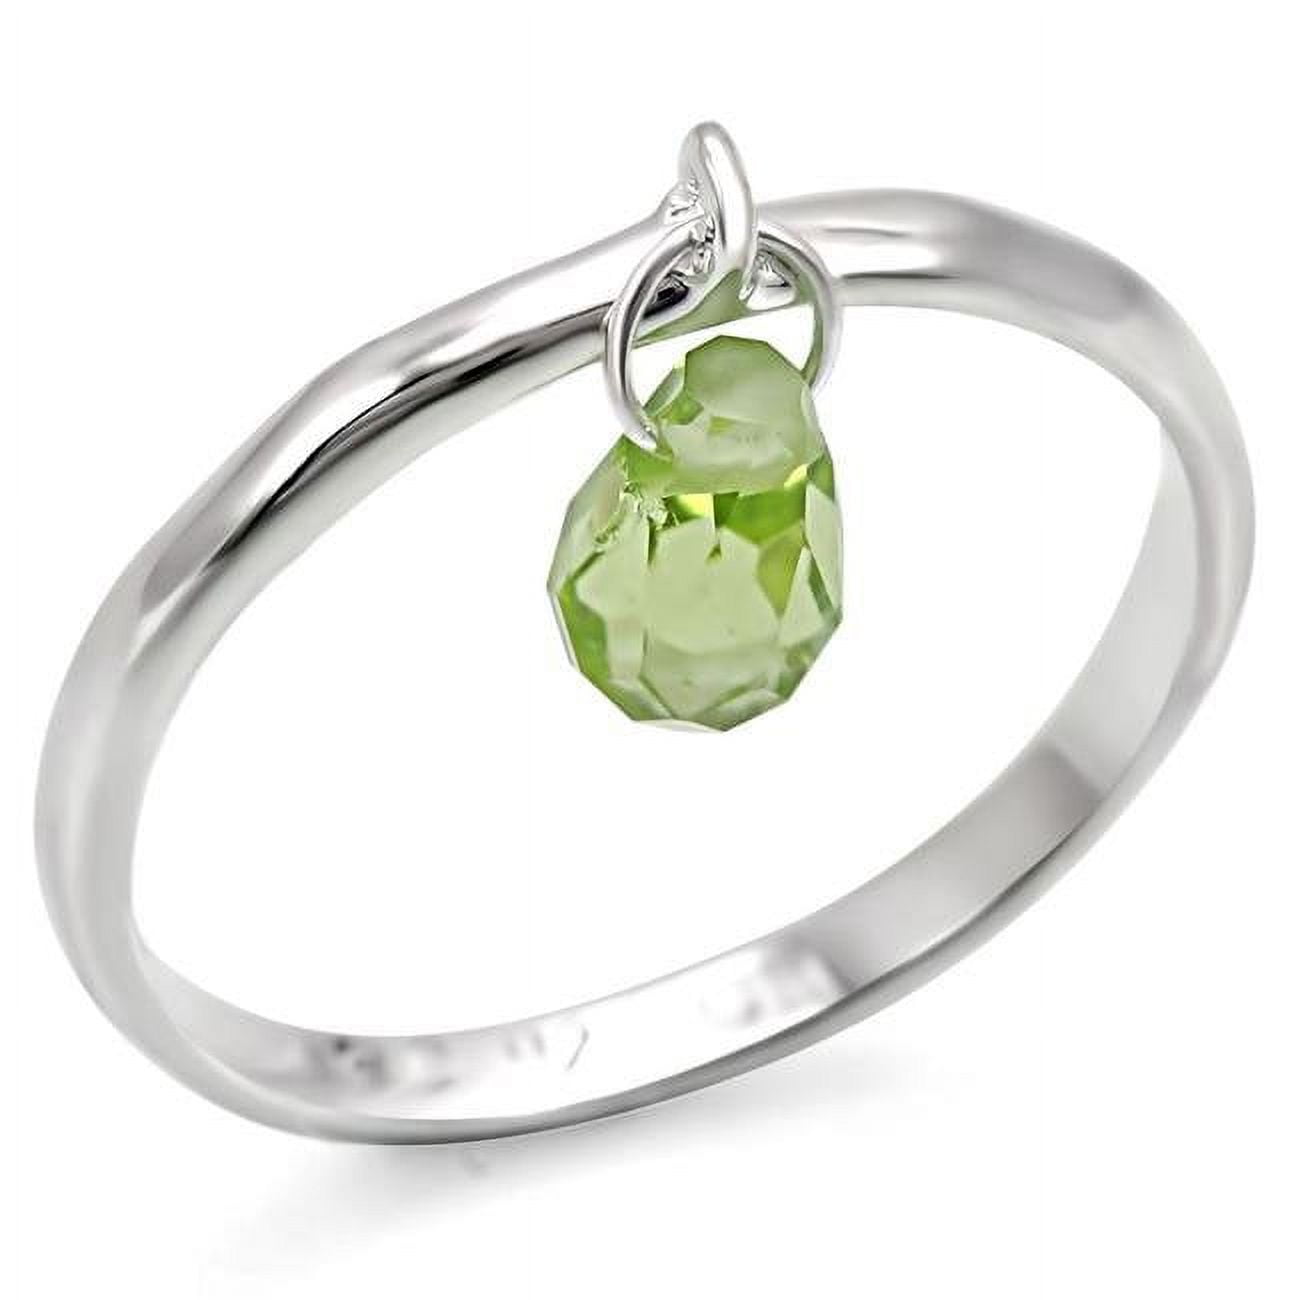 Picture of Alamode LOS321-9 Women Silver 925 Sterling Silver Ring with Genuine Stone in Peridot - Size 9